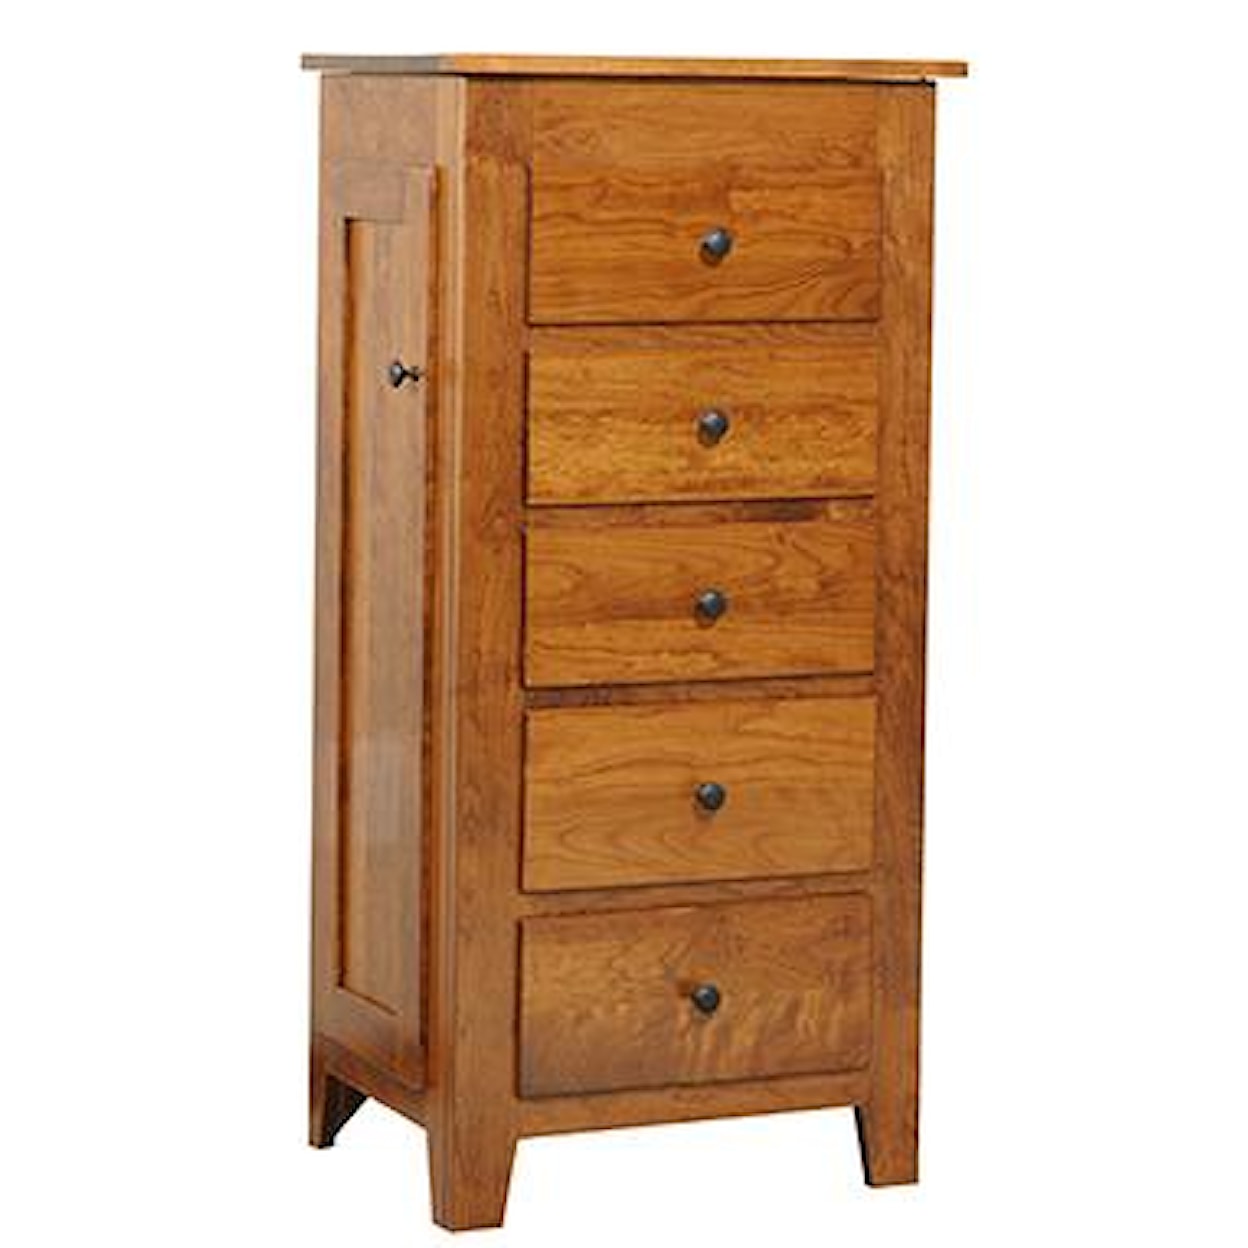 The Urban Collection Jamestown Square Jewelry Armoire